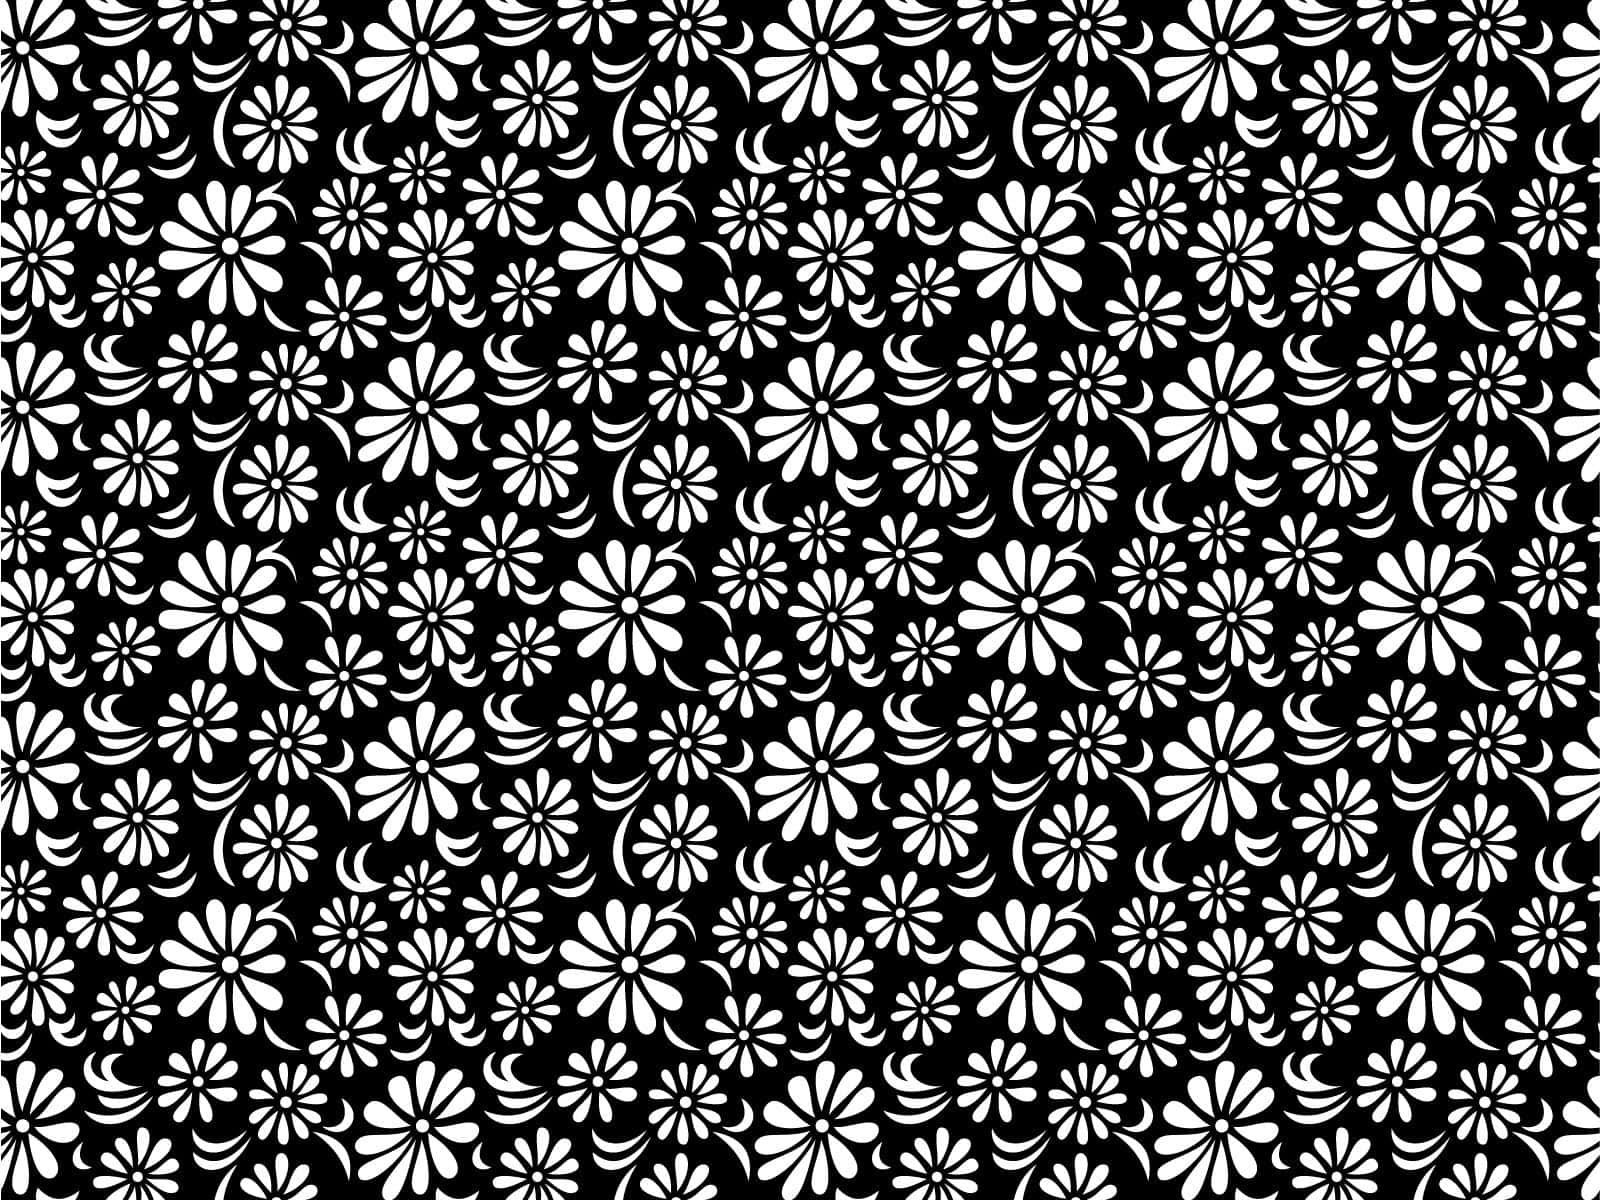 An intricate black and white pattern of shapes and symbols Wallpaper